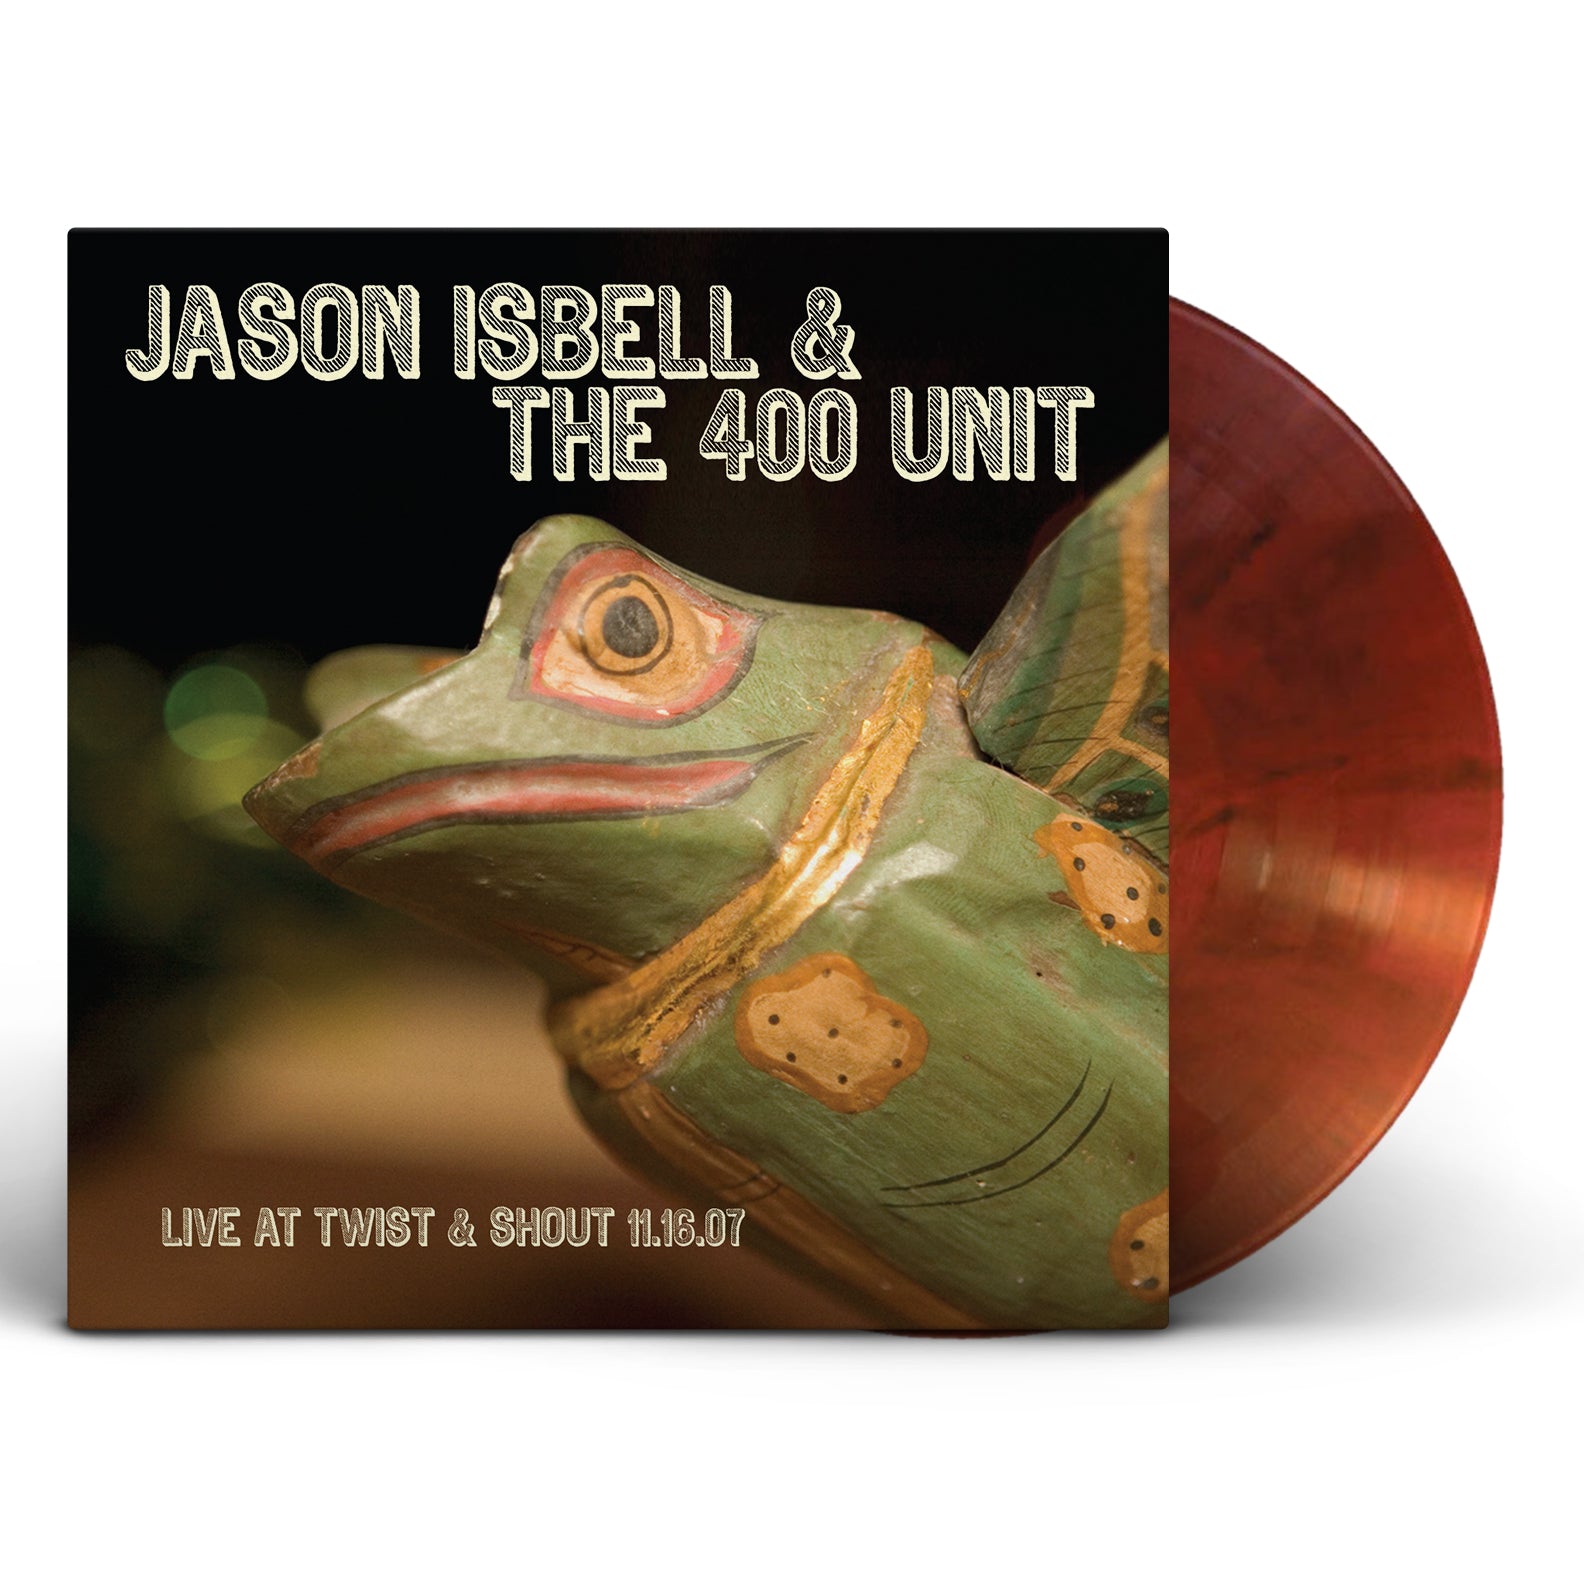 Jason Isbell & The 400 Unit - Live at Twist & Shout [Limited Edition Color Vinyl]